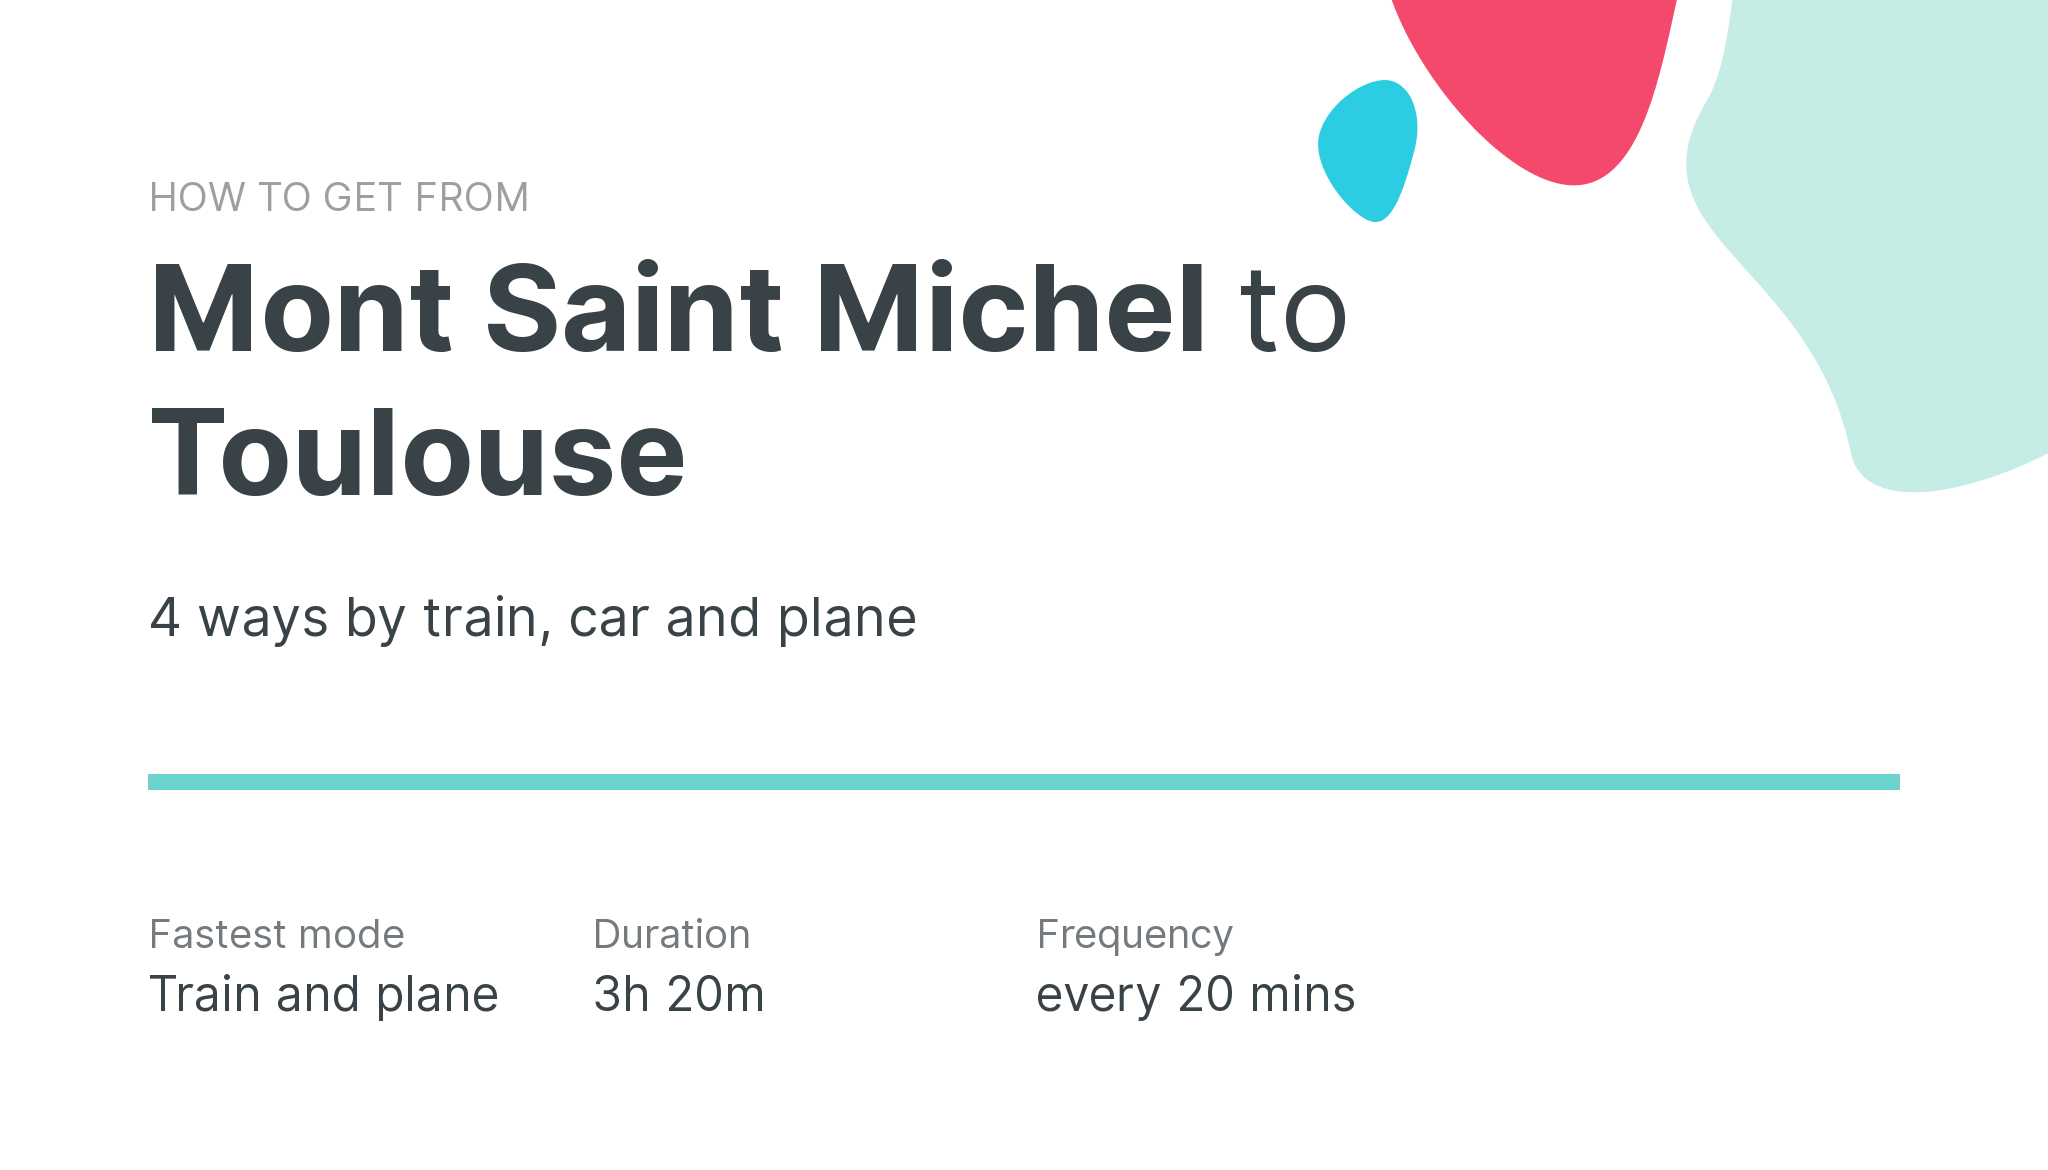 How do I get from Mont Saint Michel to Toulouse